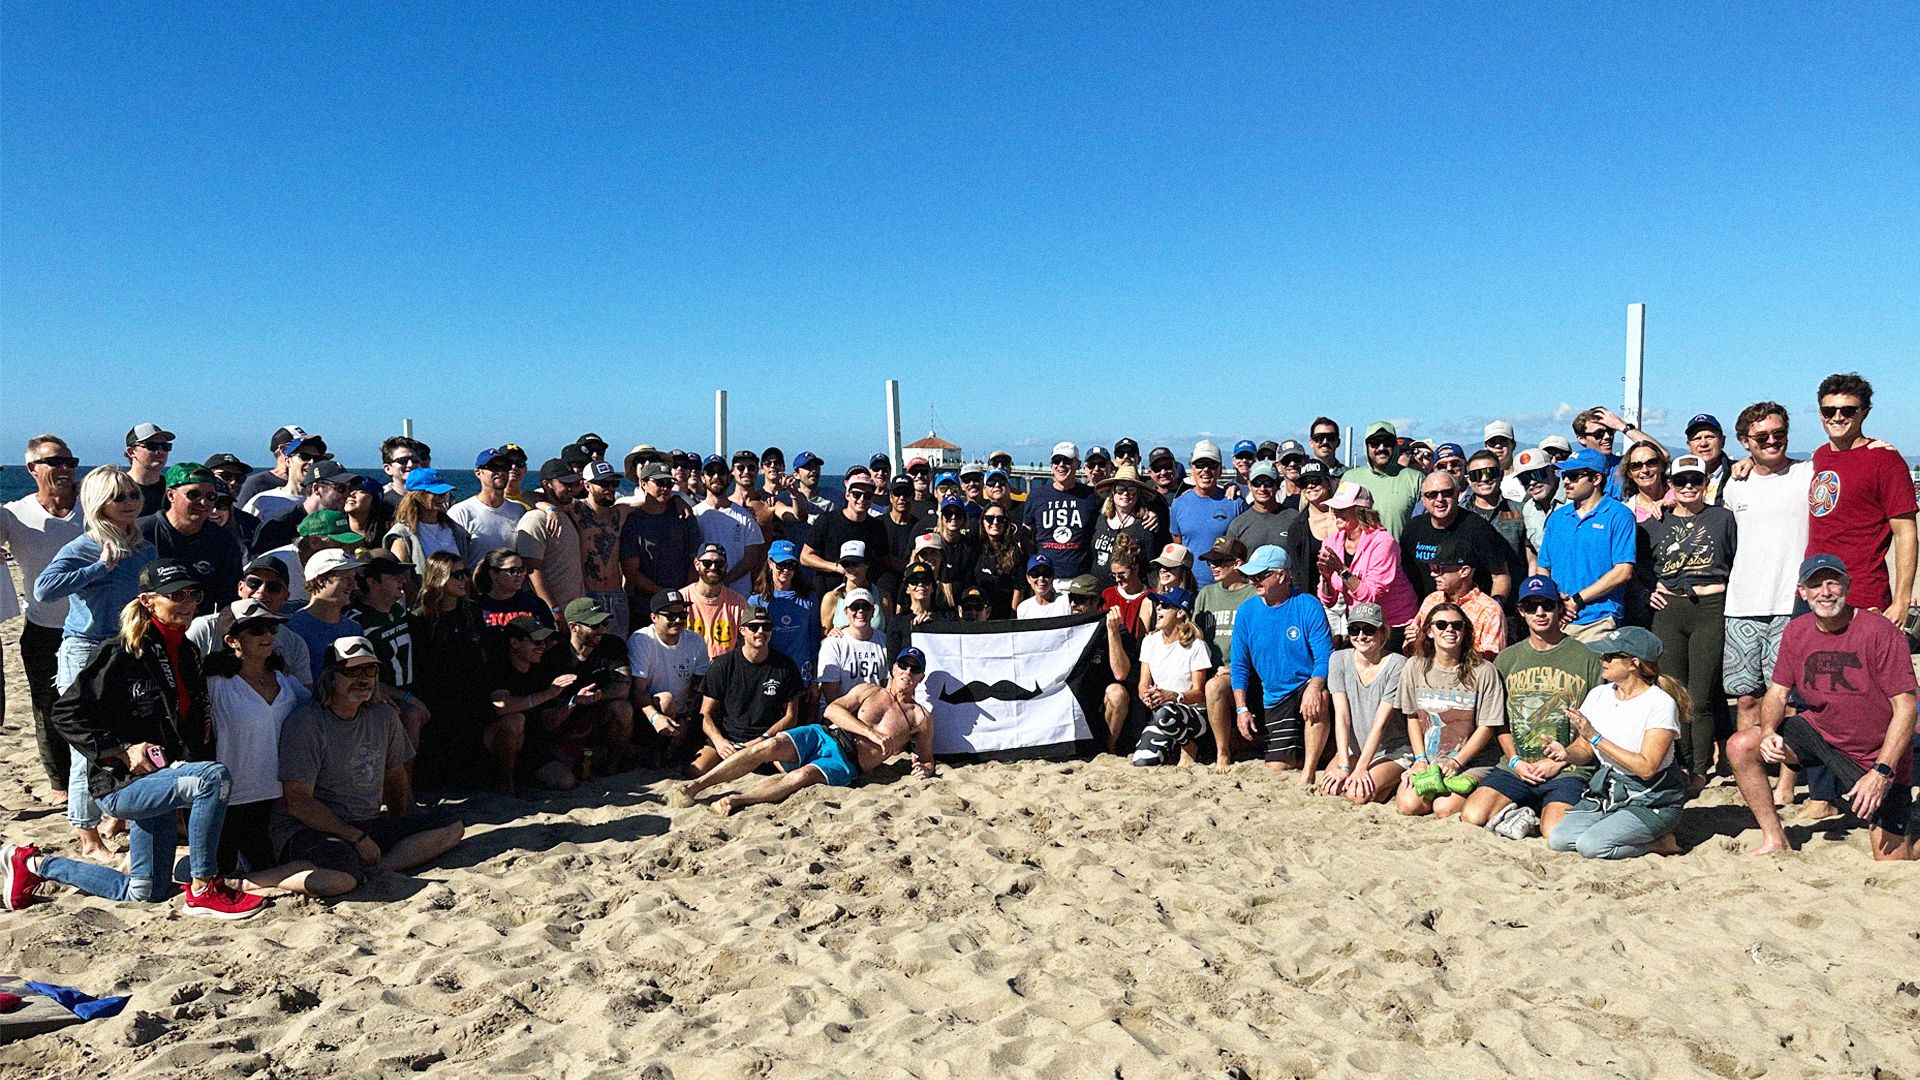 A group of men and women take a group photo on Manhattan Beach, holding a Movember moustache flag in the middle